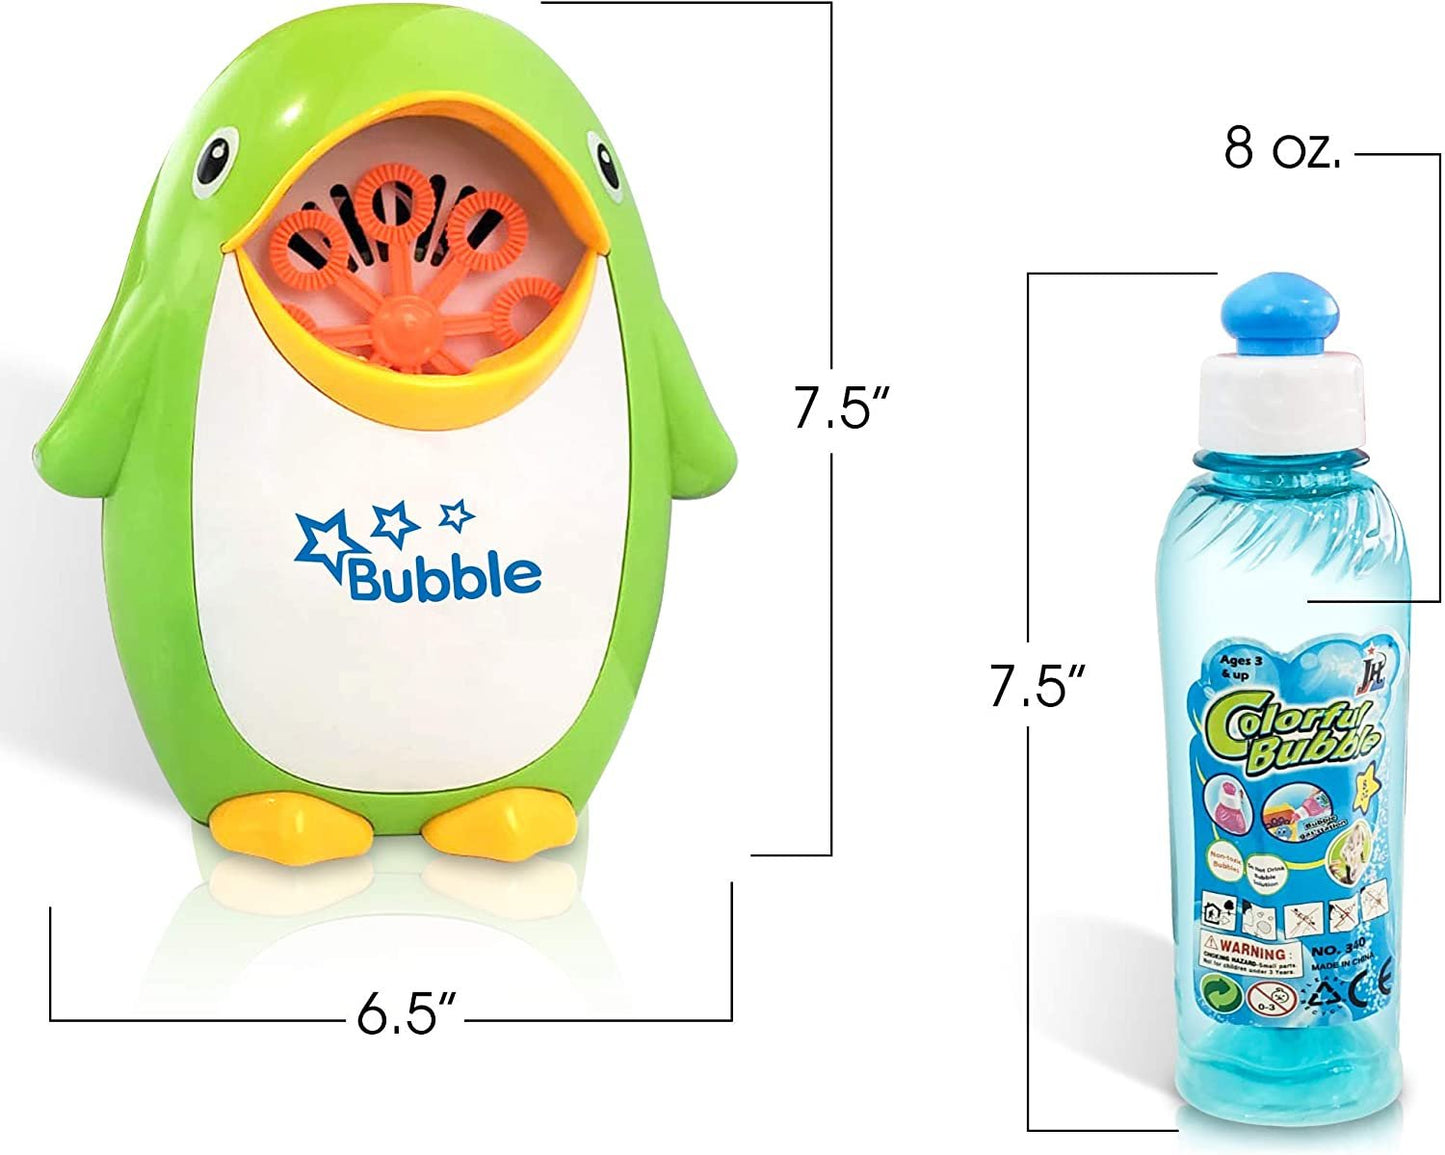 ArtCreativity Penguin Bubble Machine with 8oz Bubble Solution, Cute Powerful Automatic Bubble Maker Toy for Kids and Parties, Simple and Easy to Use, Best for Wedding, Birthday Party, DJ, Baby Shower